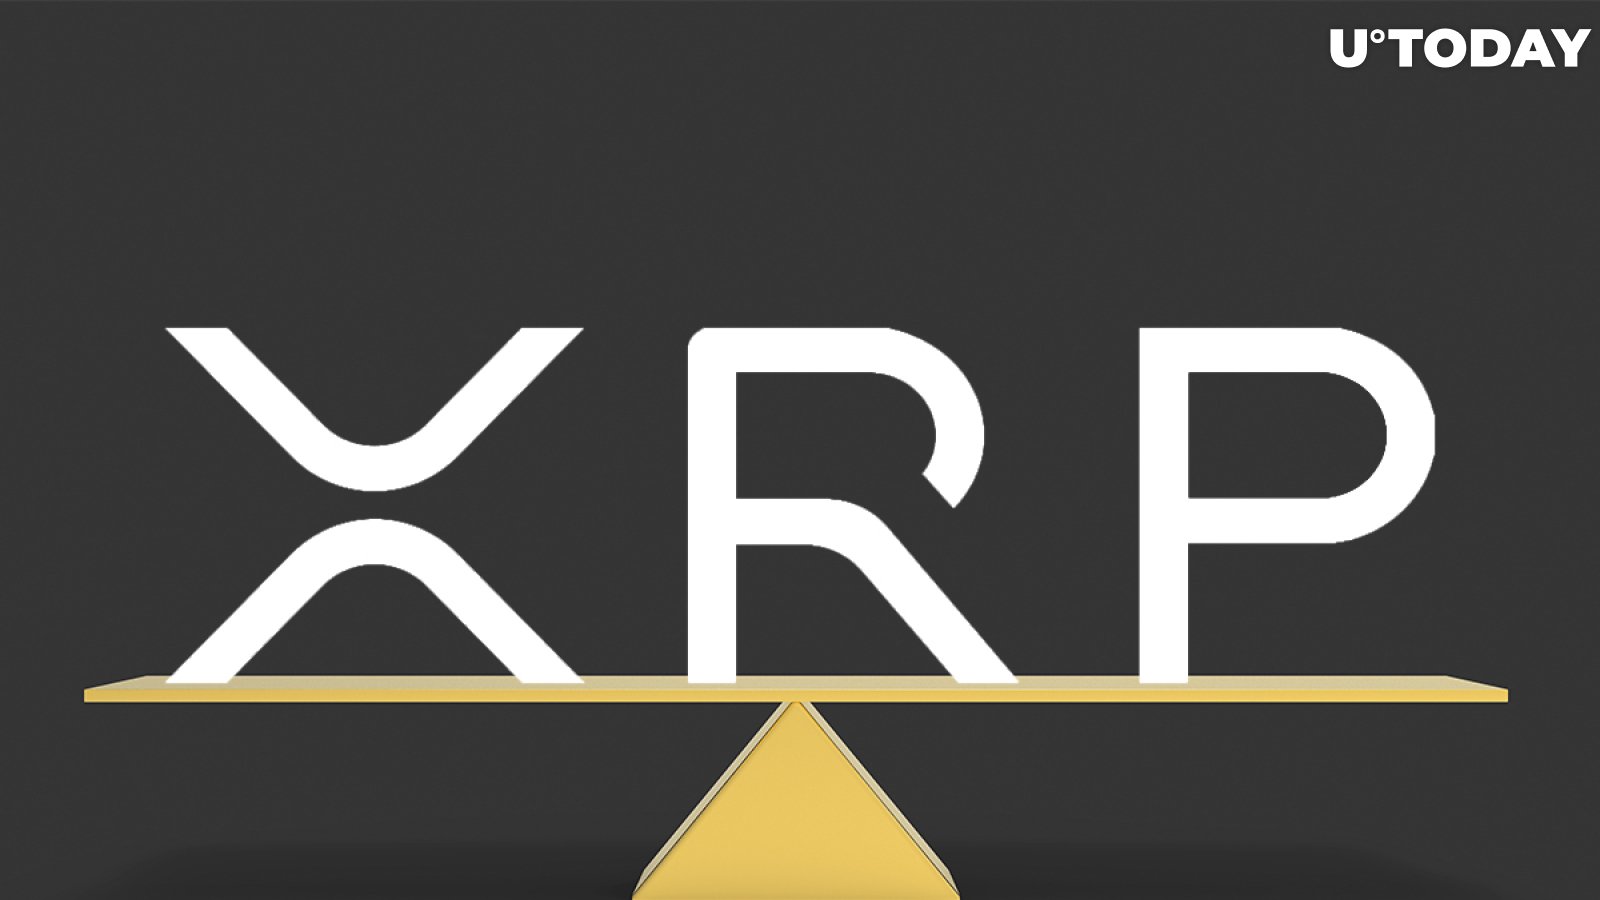 XRP Revisits $0.9 But Fails to Hold There